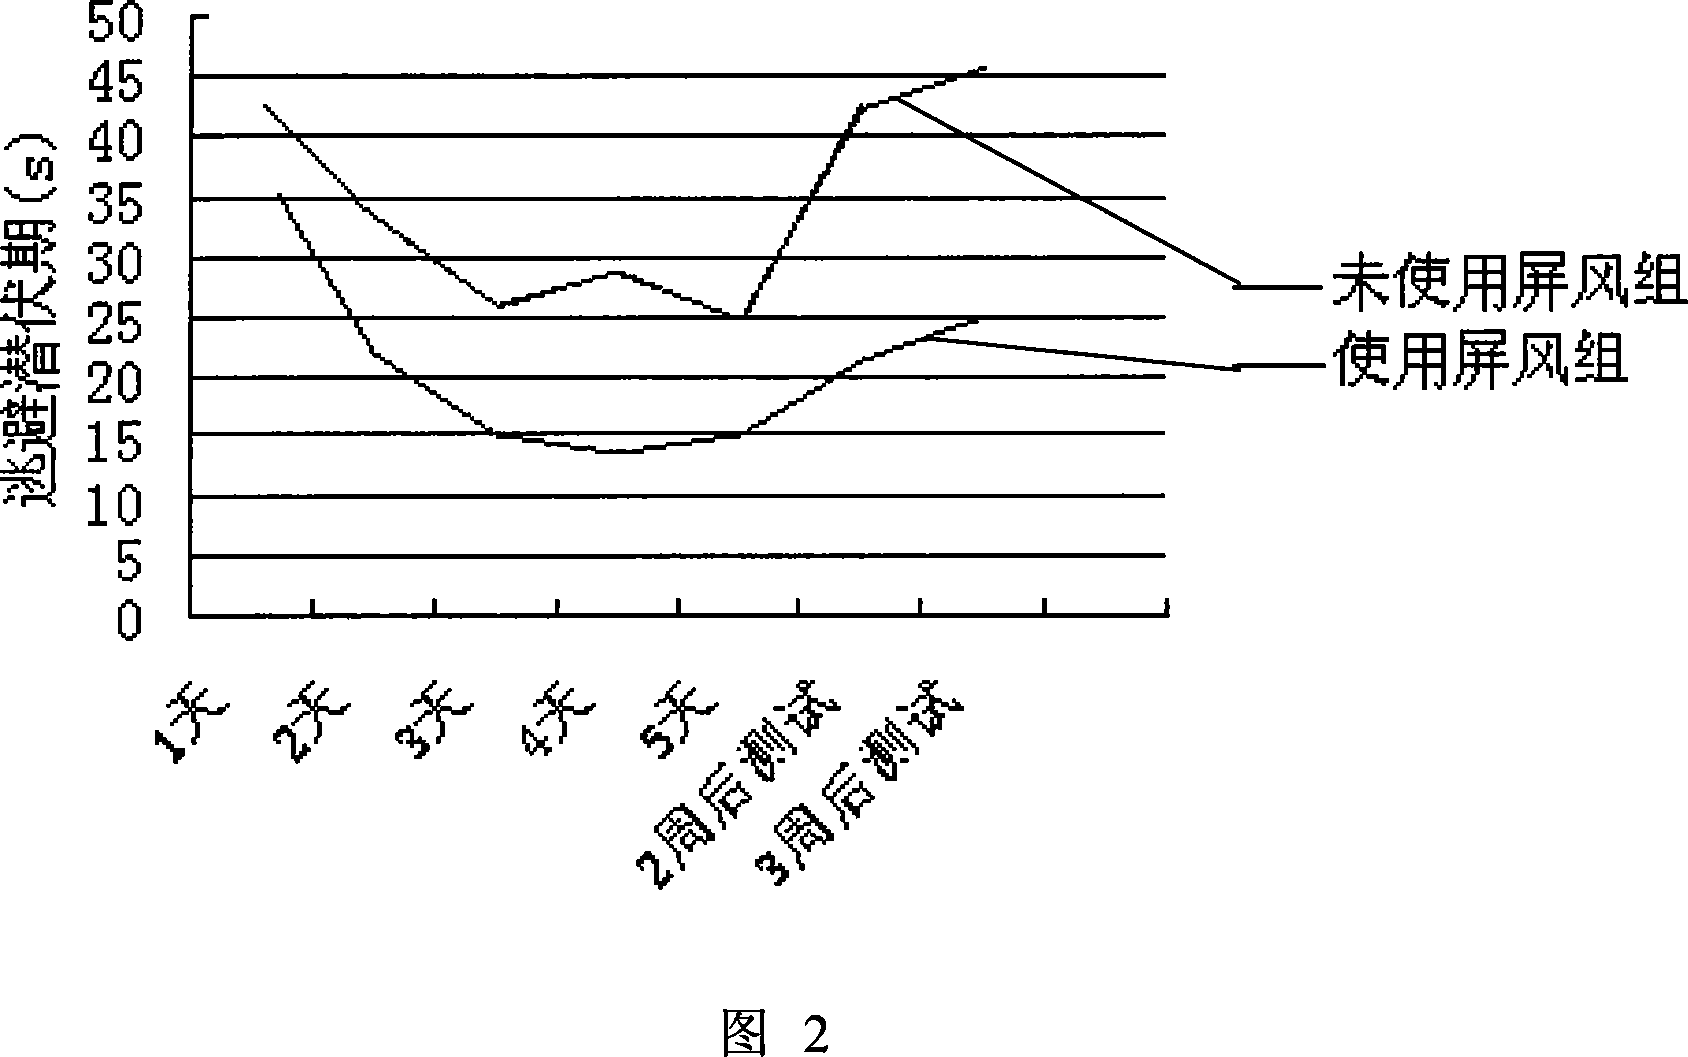 Method and device for reinforcing spatial memory of water maze laboratory animal